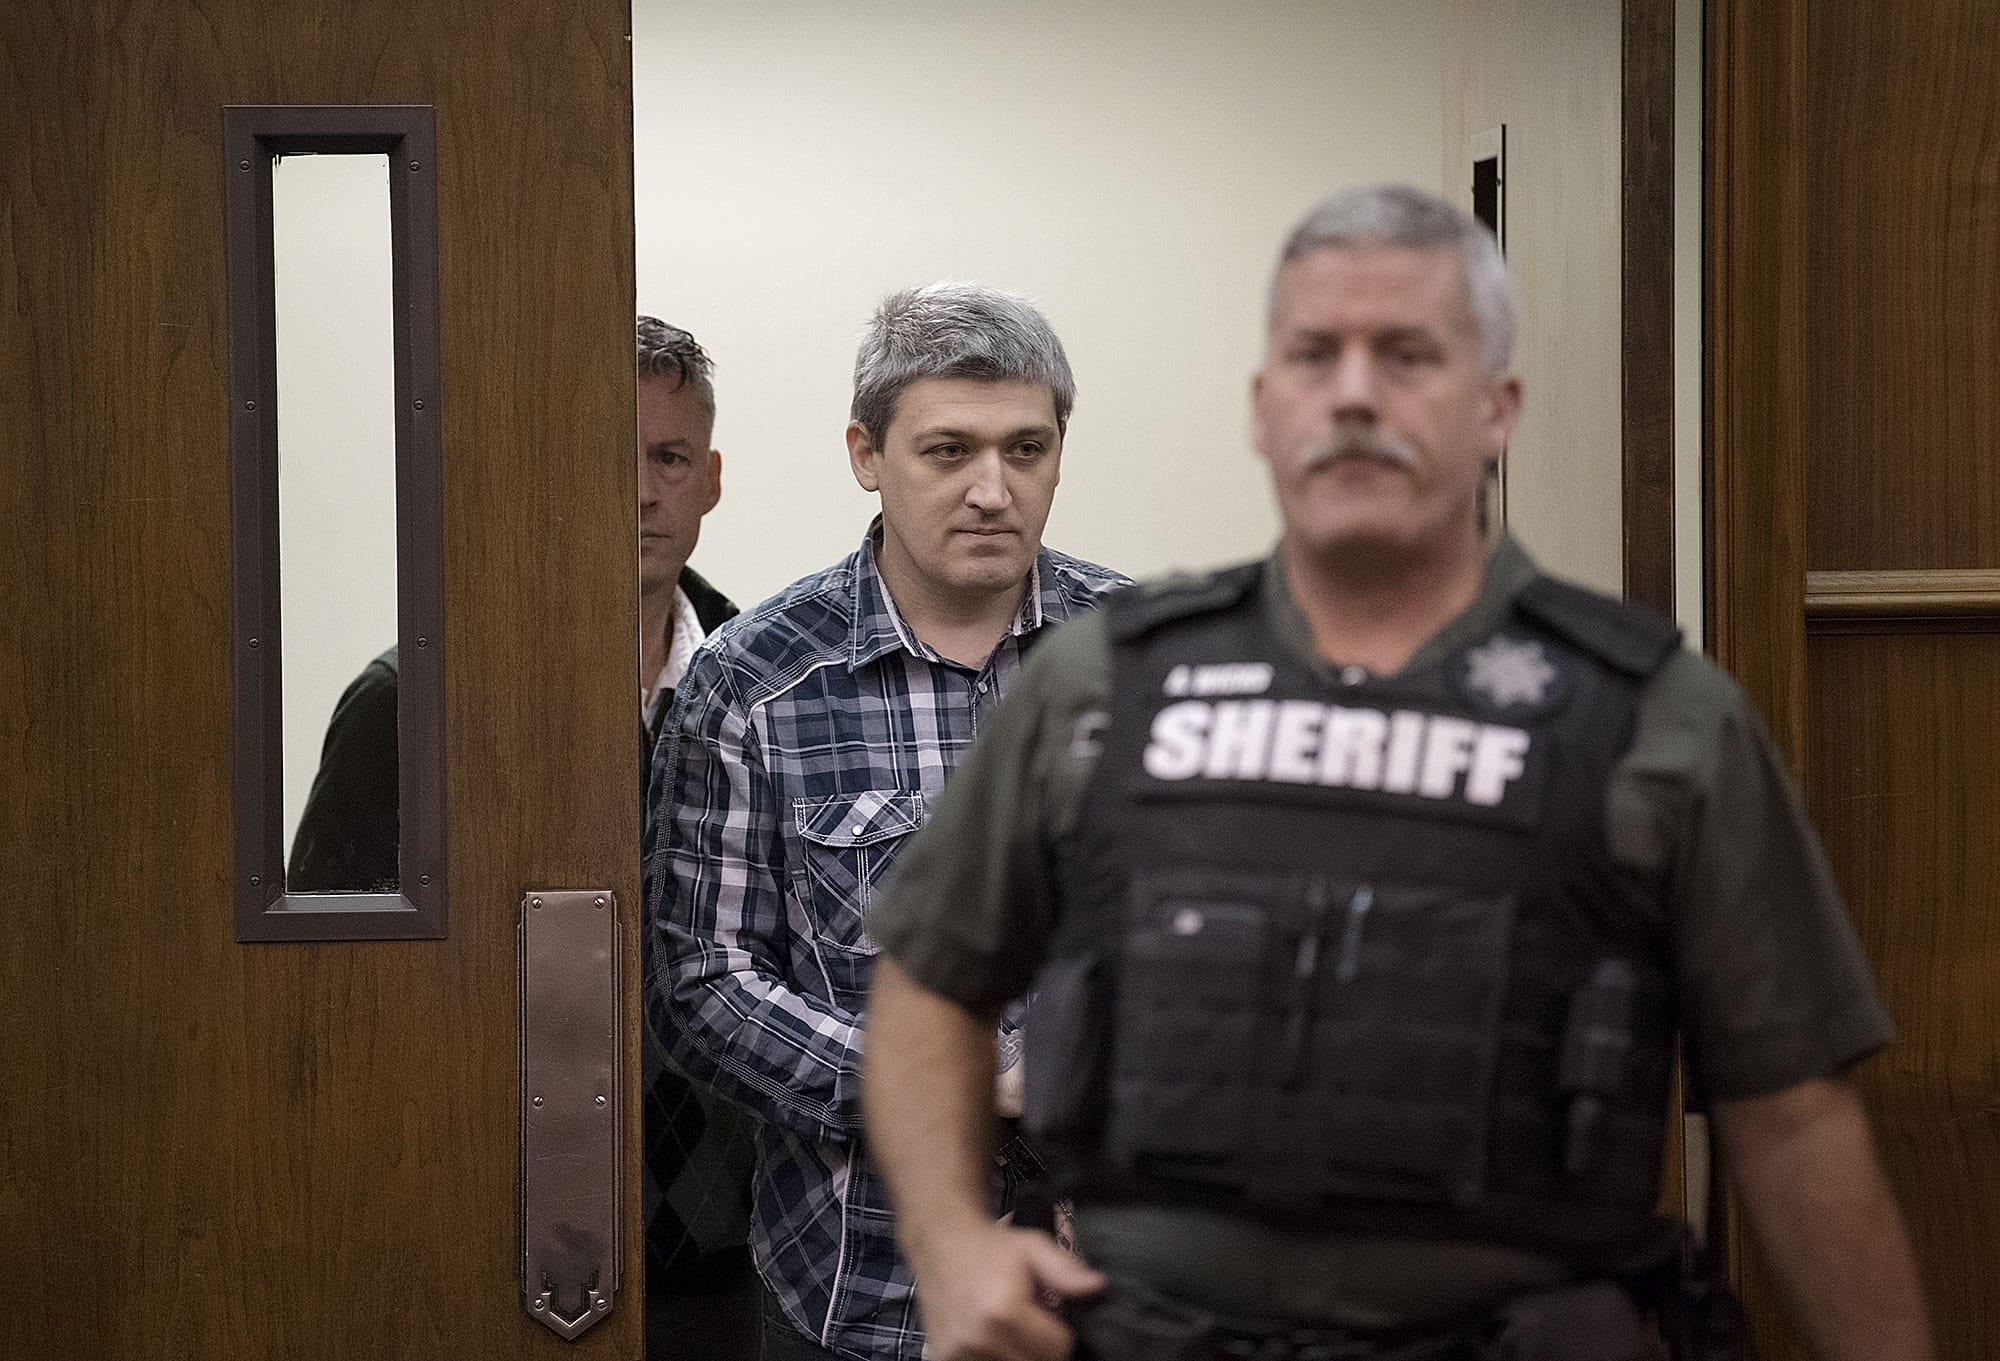 Brent Luyster, center, makes his way into the courtroom during his triple aggravated murder trial in Clark County Superior Court on Monday morning, Nov. 13, 2017.